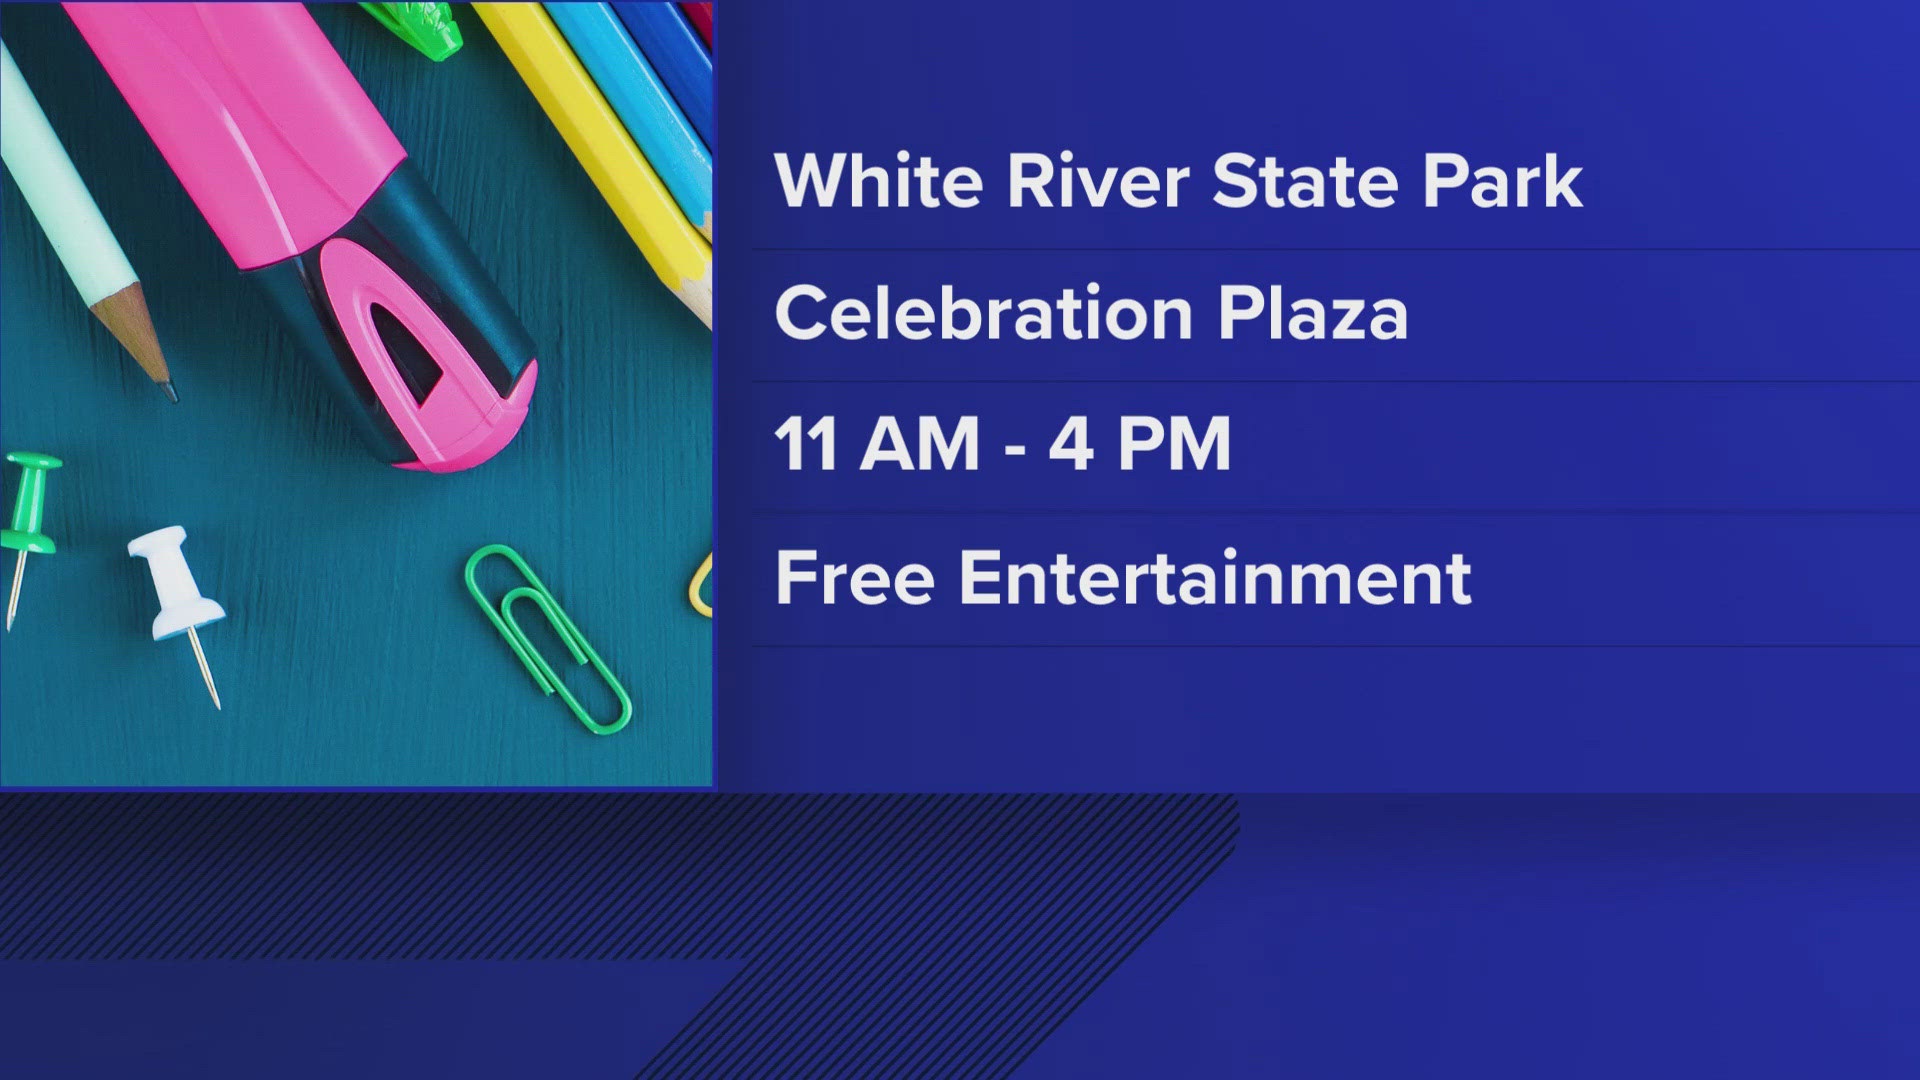 White River State Park is hosting a back-to-school supply drive for teachers of students in need.